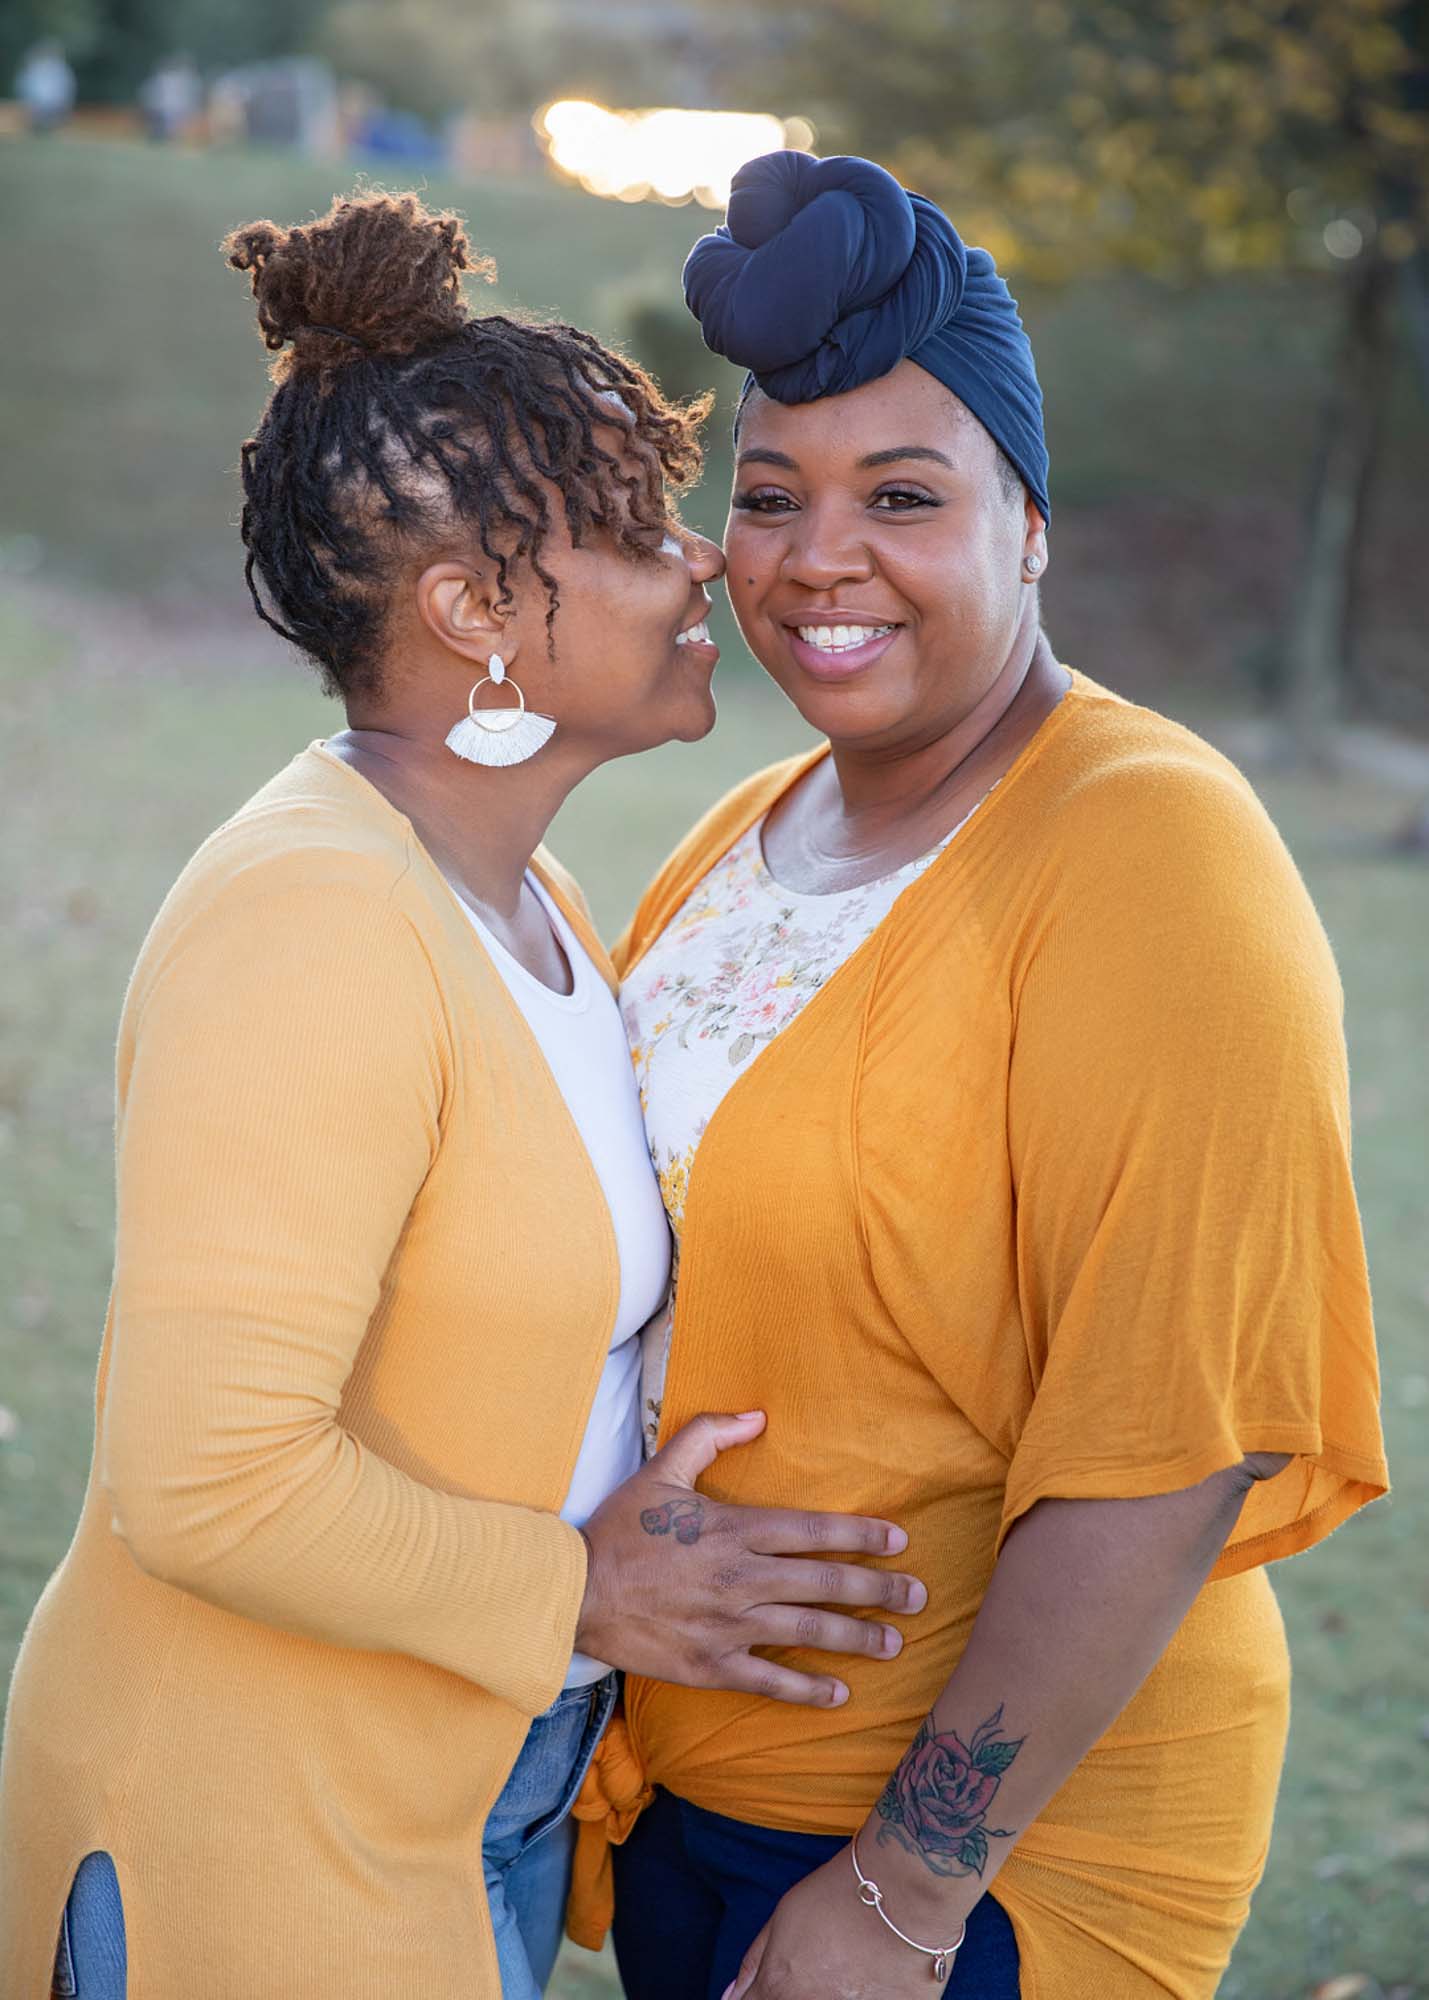 Laughter-filled sunset engagement session on the Tennessee River | Joshua & Inez Photography | Featured on Equally Wed, the leading LGBTQ+ wedding magazine